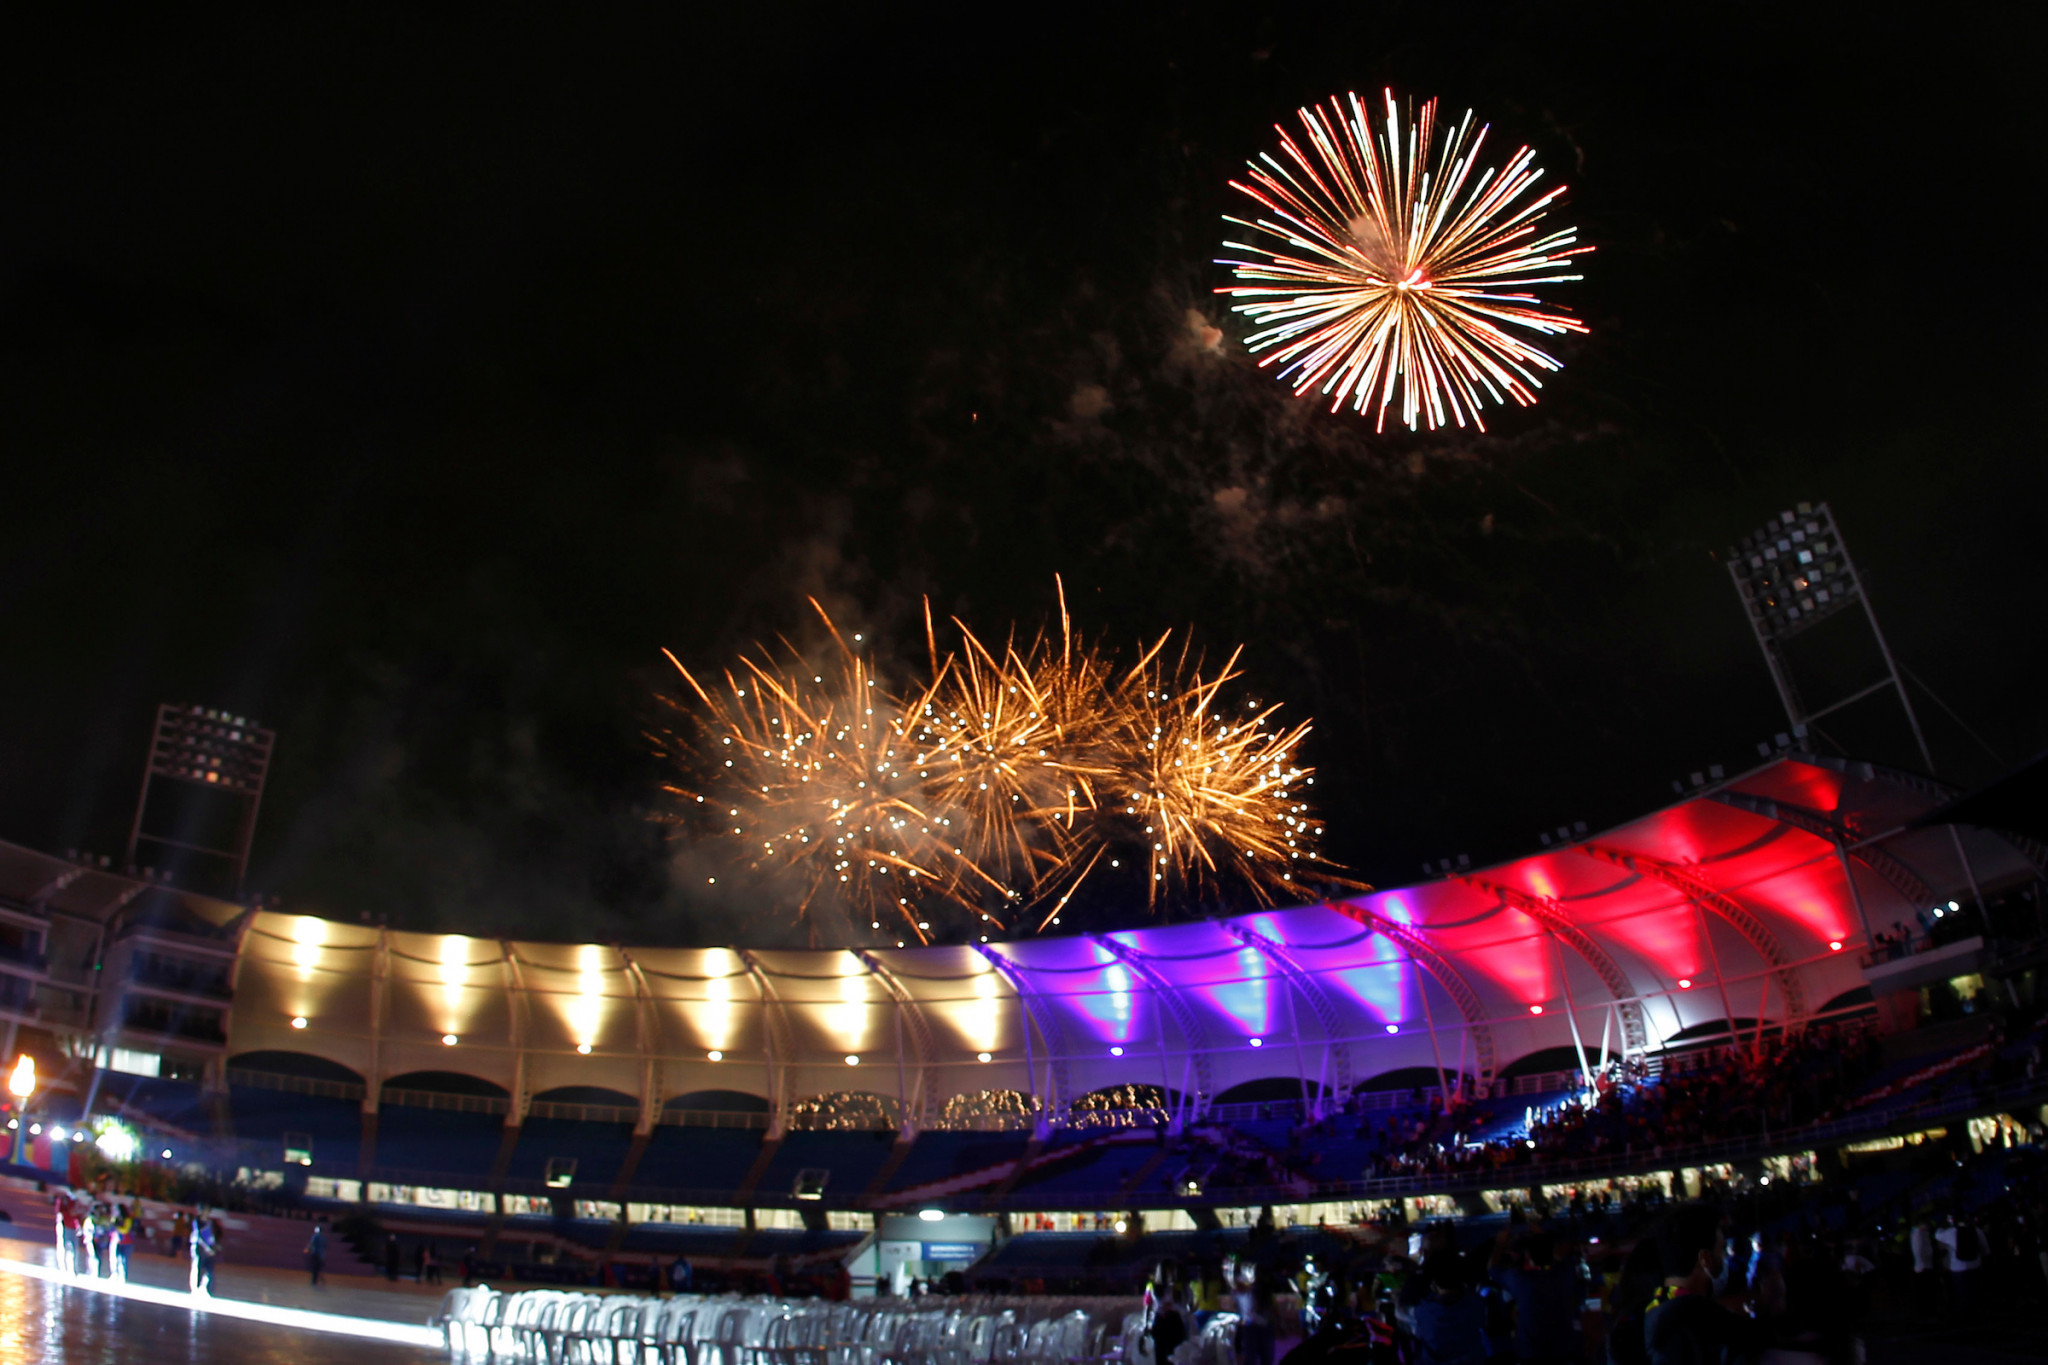 A spectacular fireworks display closed out the Junior Pan American Games Opening Ceremony ©Agencia.XpressMedia